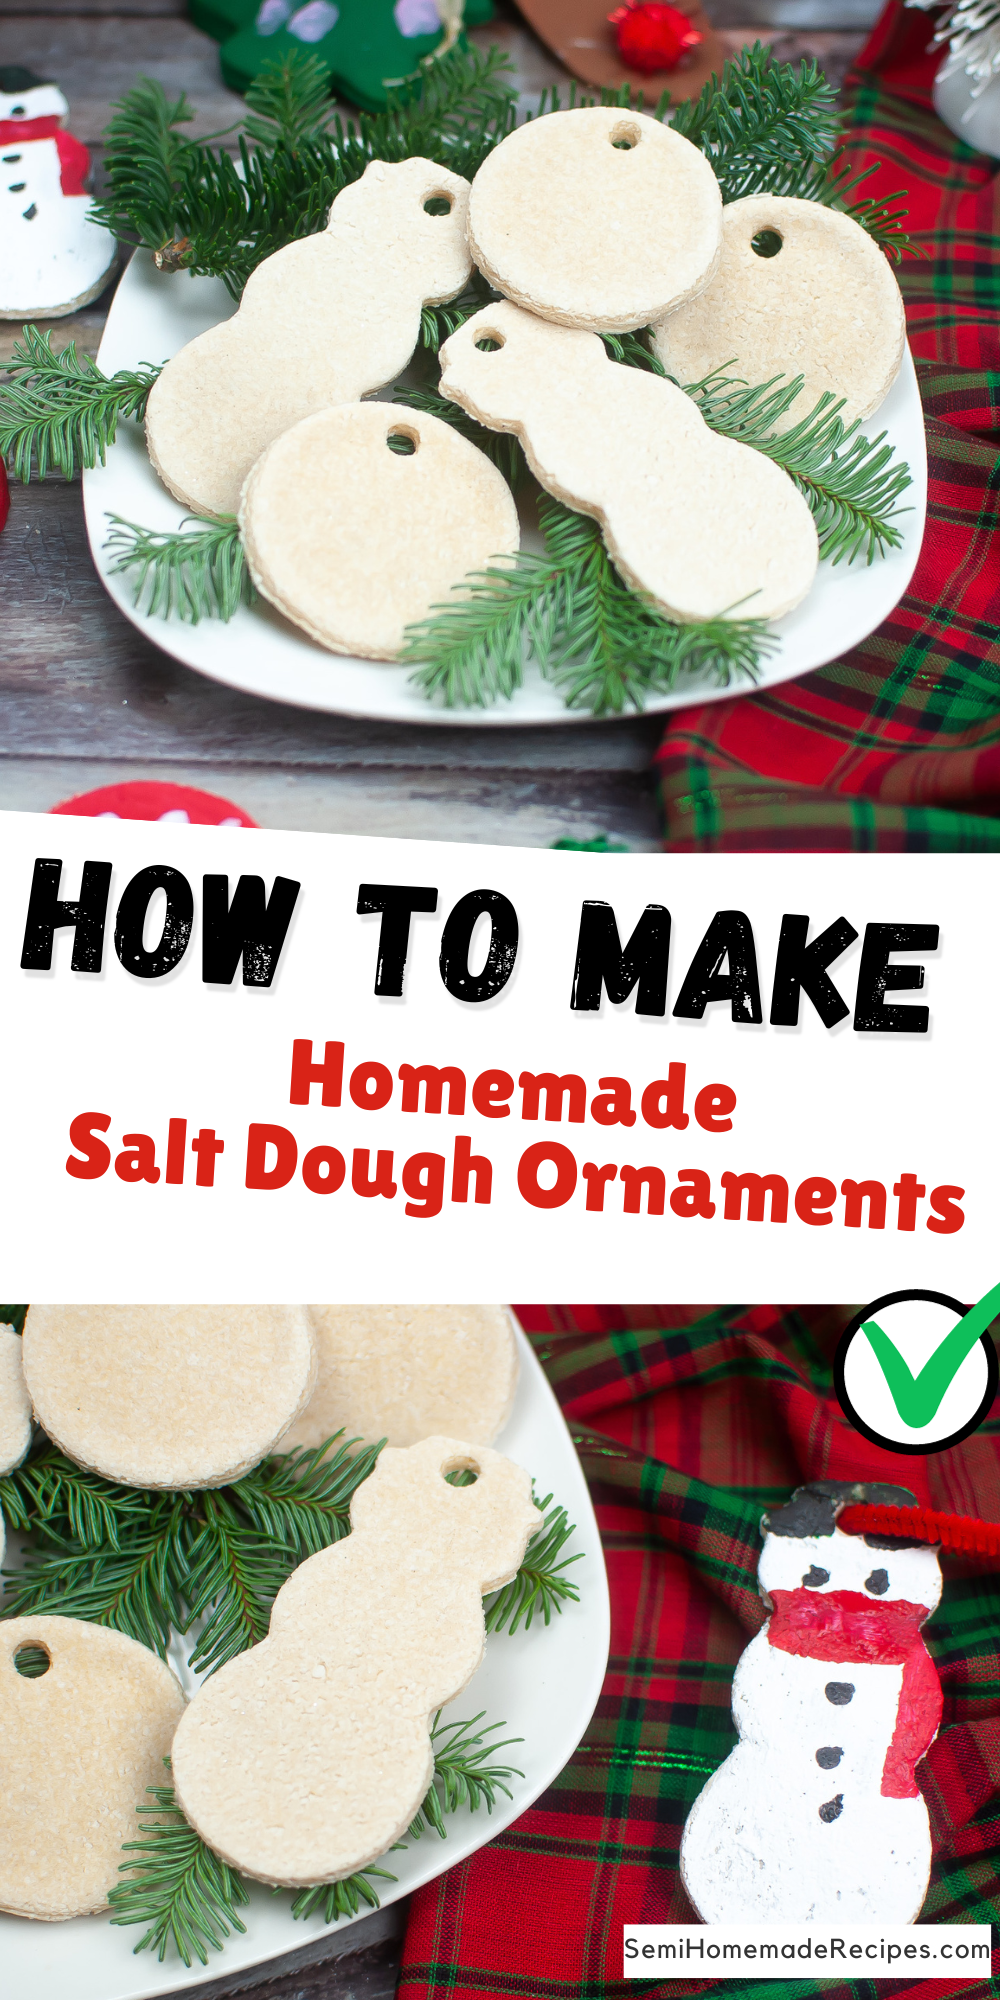 Get inspired to create homemade salt dough ornaments for more than just Christmas. This article will guide you through innovative ideas and designs that can be adapted for various holidays, celebrations, and special occasions. From personalized gifts to unique decorations, let your imagination run wild with salt dough.